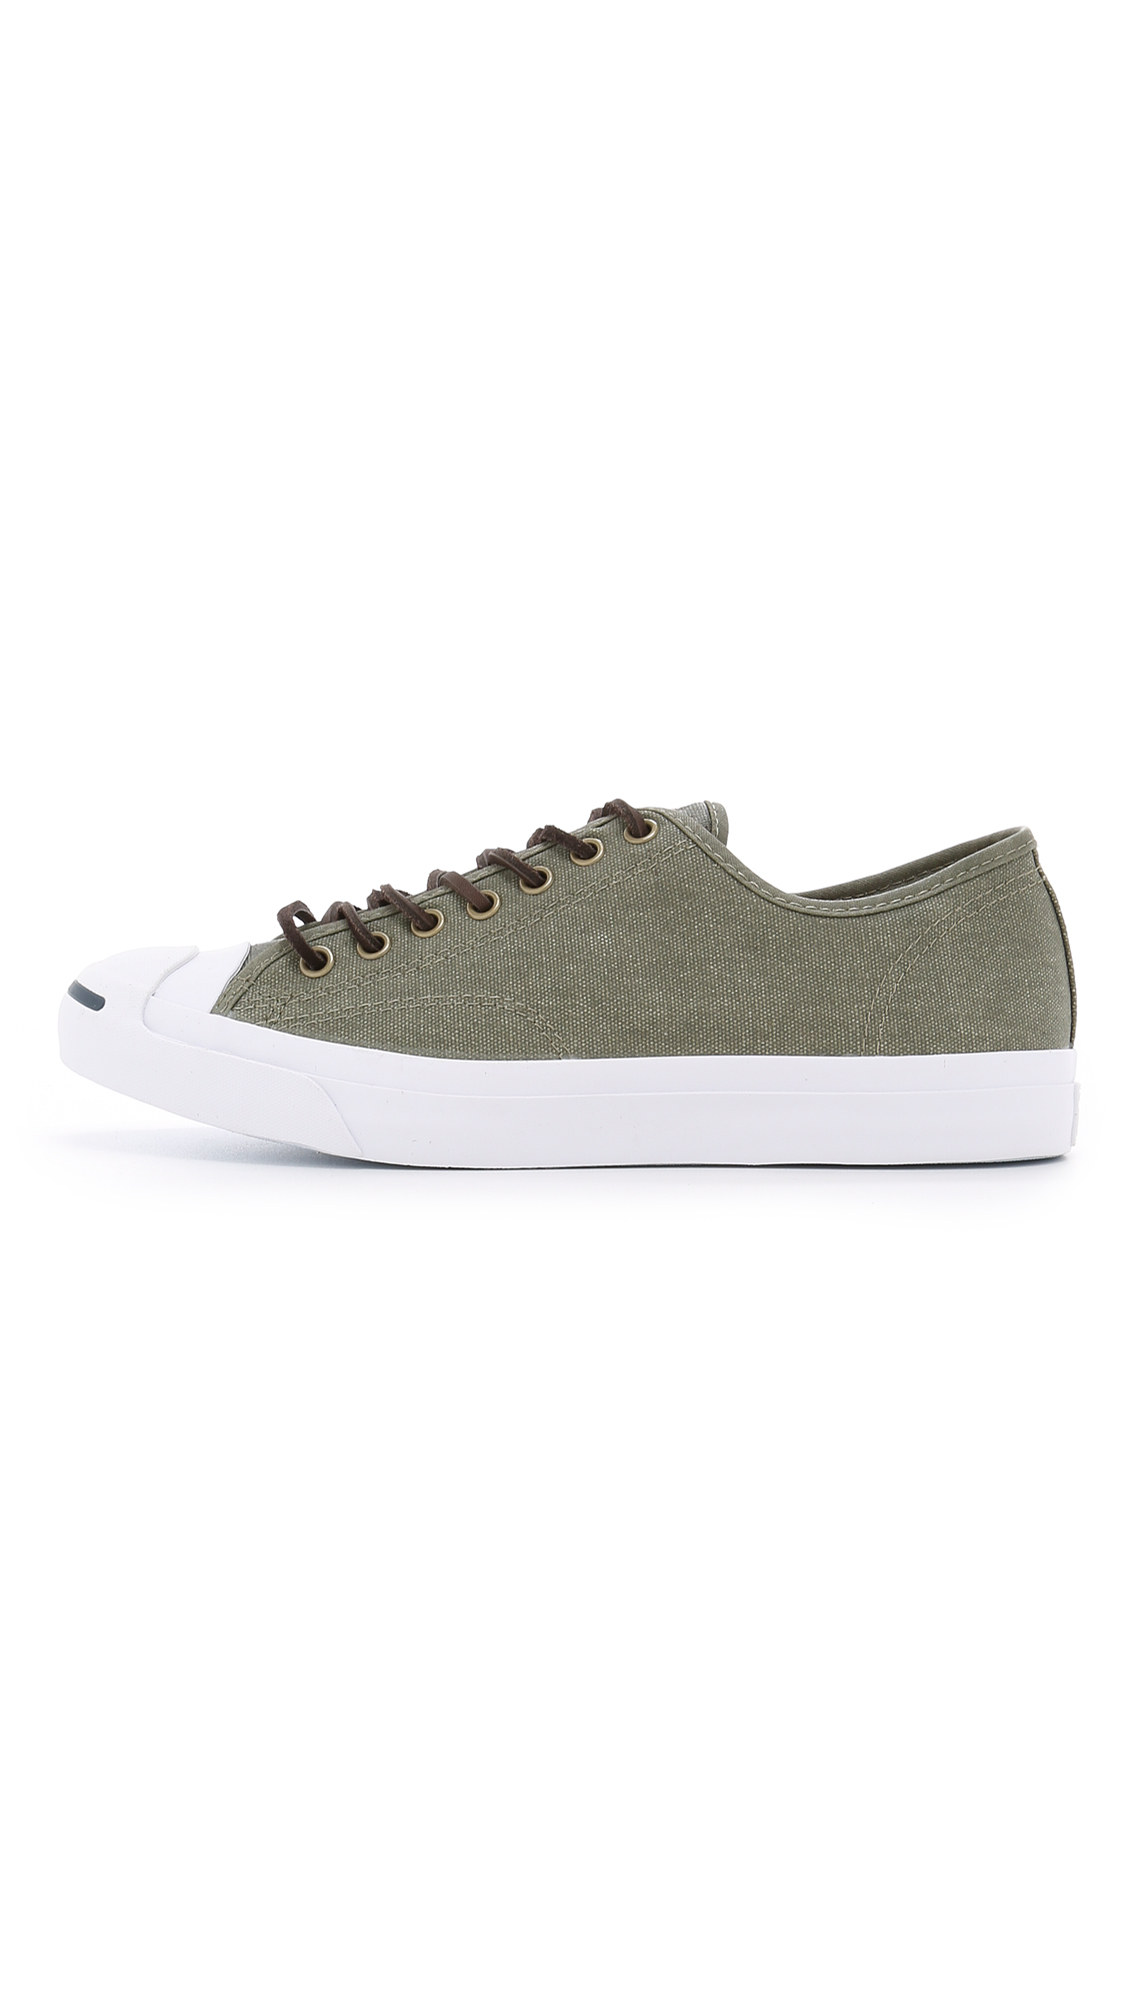 Converse Canvas Jack Purcell  Rubberized Paint  Sneakers in 